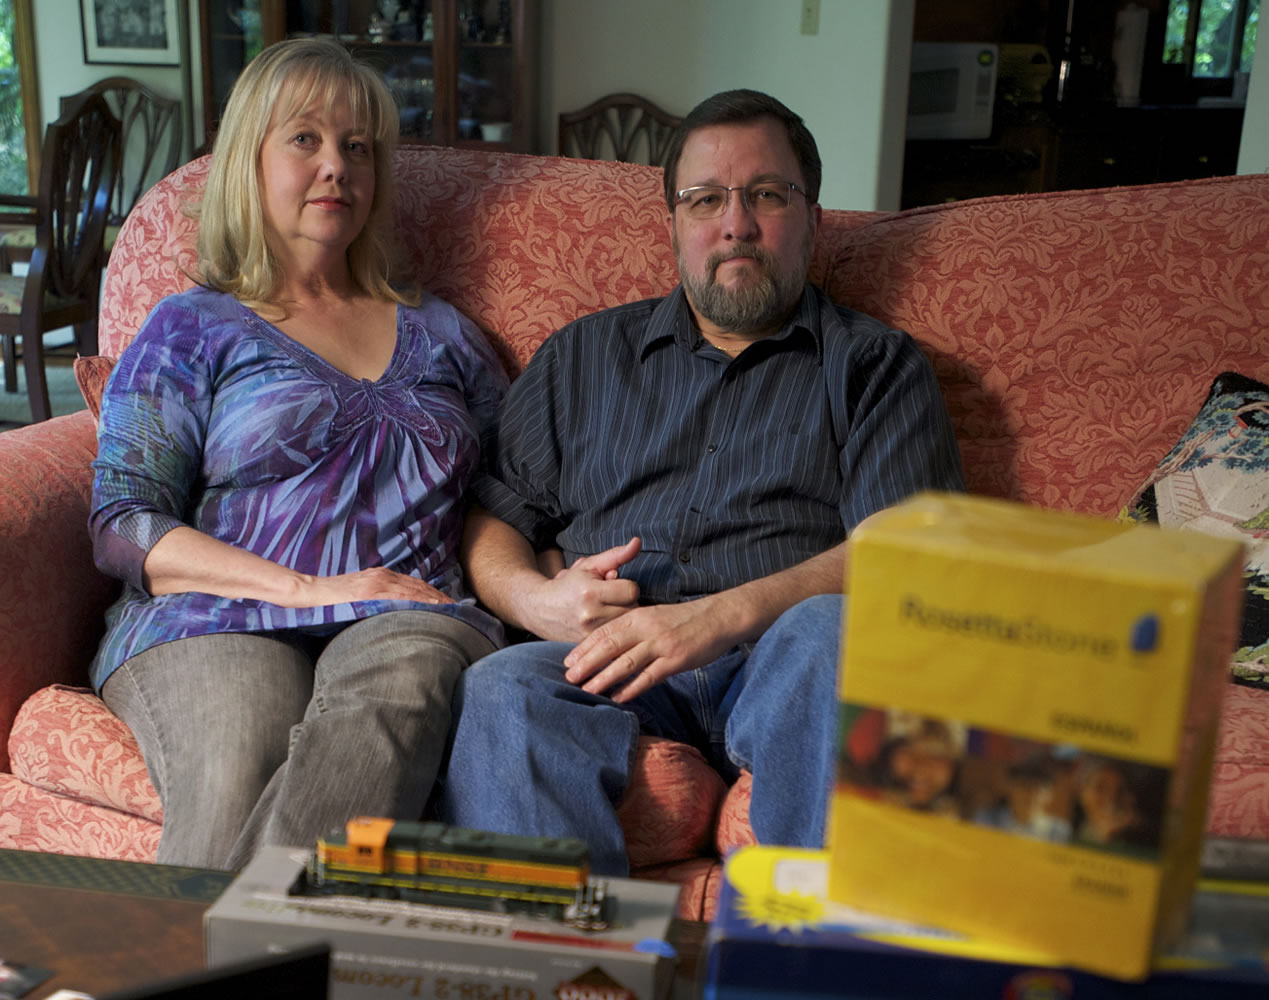 John and Susy Hoefer were trying to raise money for their nephew's headstone by selling some of his belongings, including Rosetta Stone software. After posting the software on eBay, the two were told it was pirated.